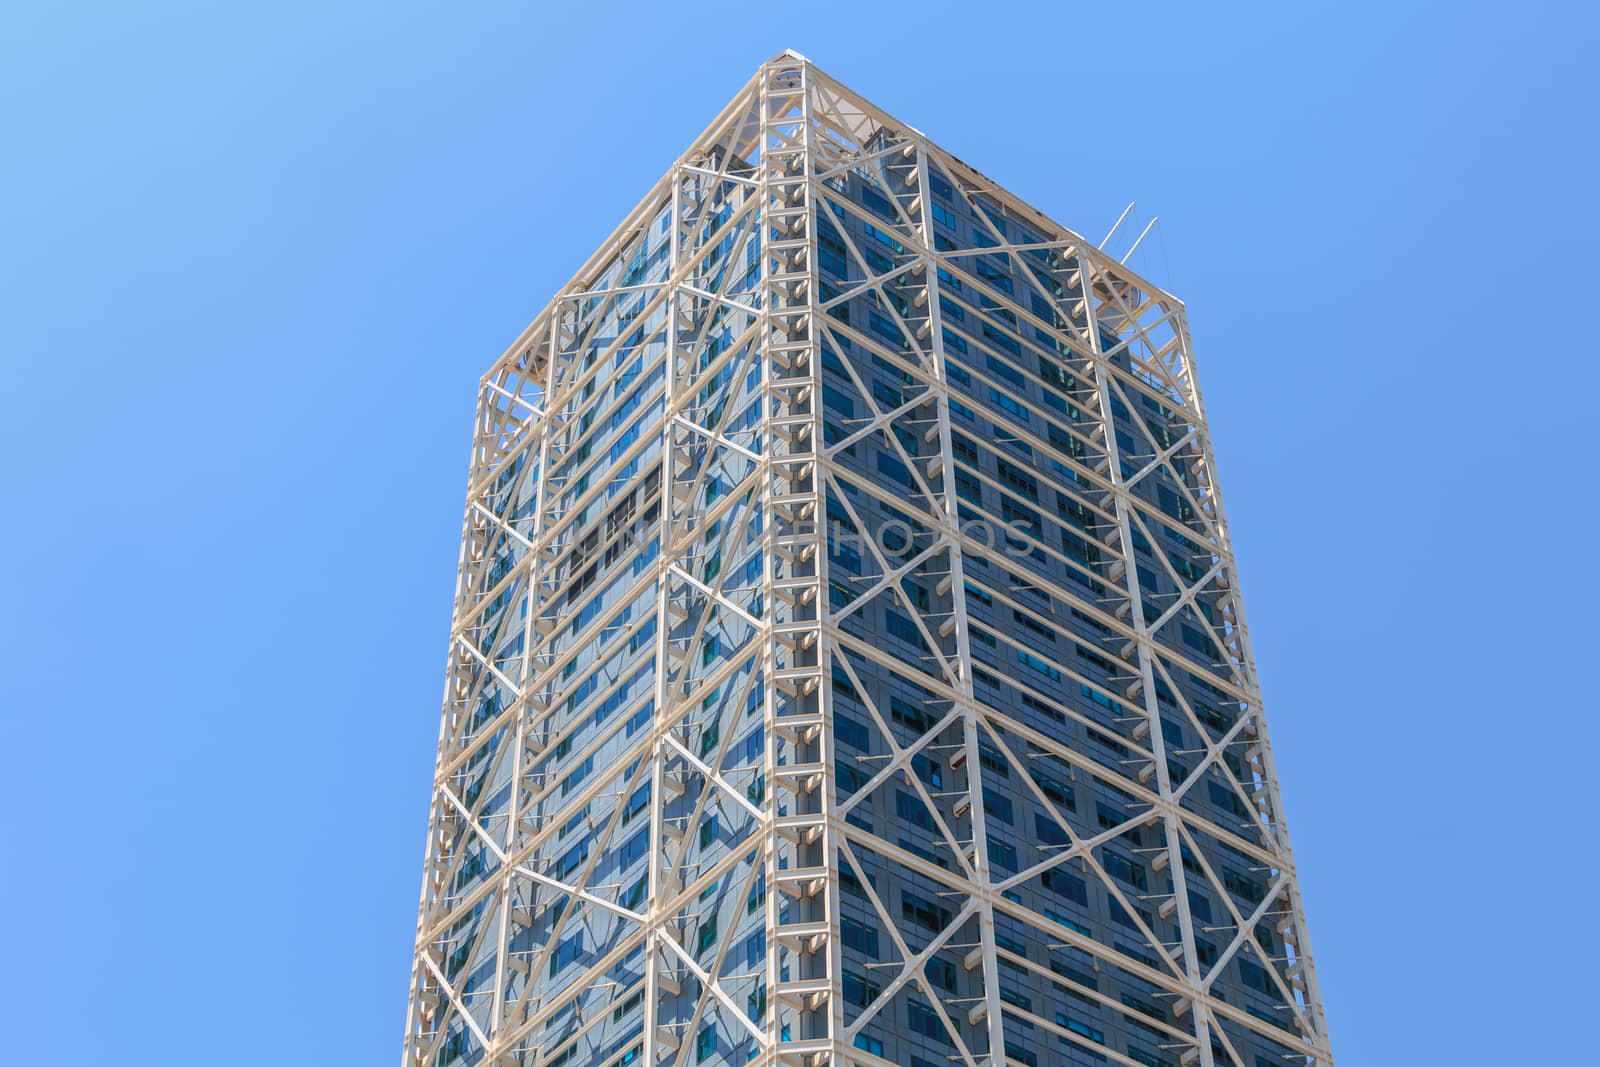 BARCELONA, SPAIN - June 21, 2017 : architectural detail of the Hotel Arts tower during the summer, a skyscraper designed by the American architect Bruce Graham and built for the 1992 Summer Olympics